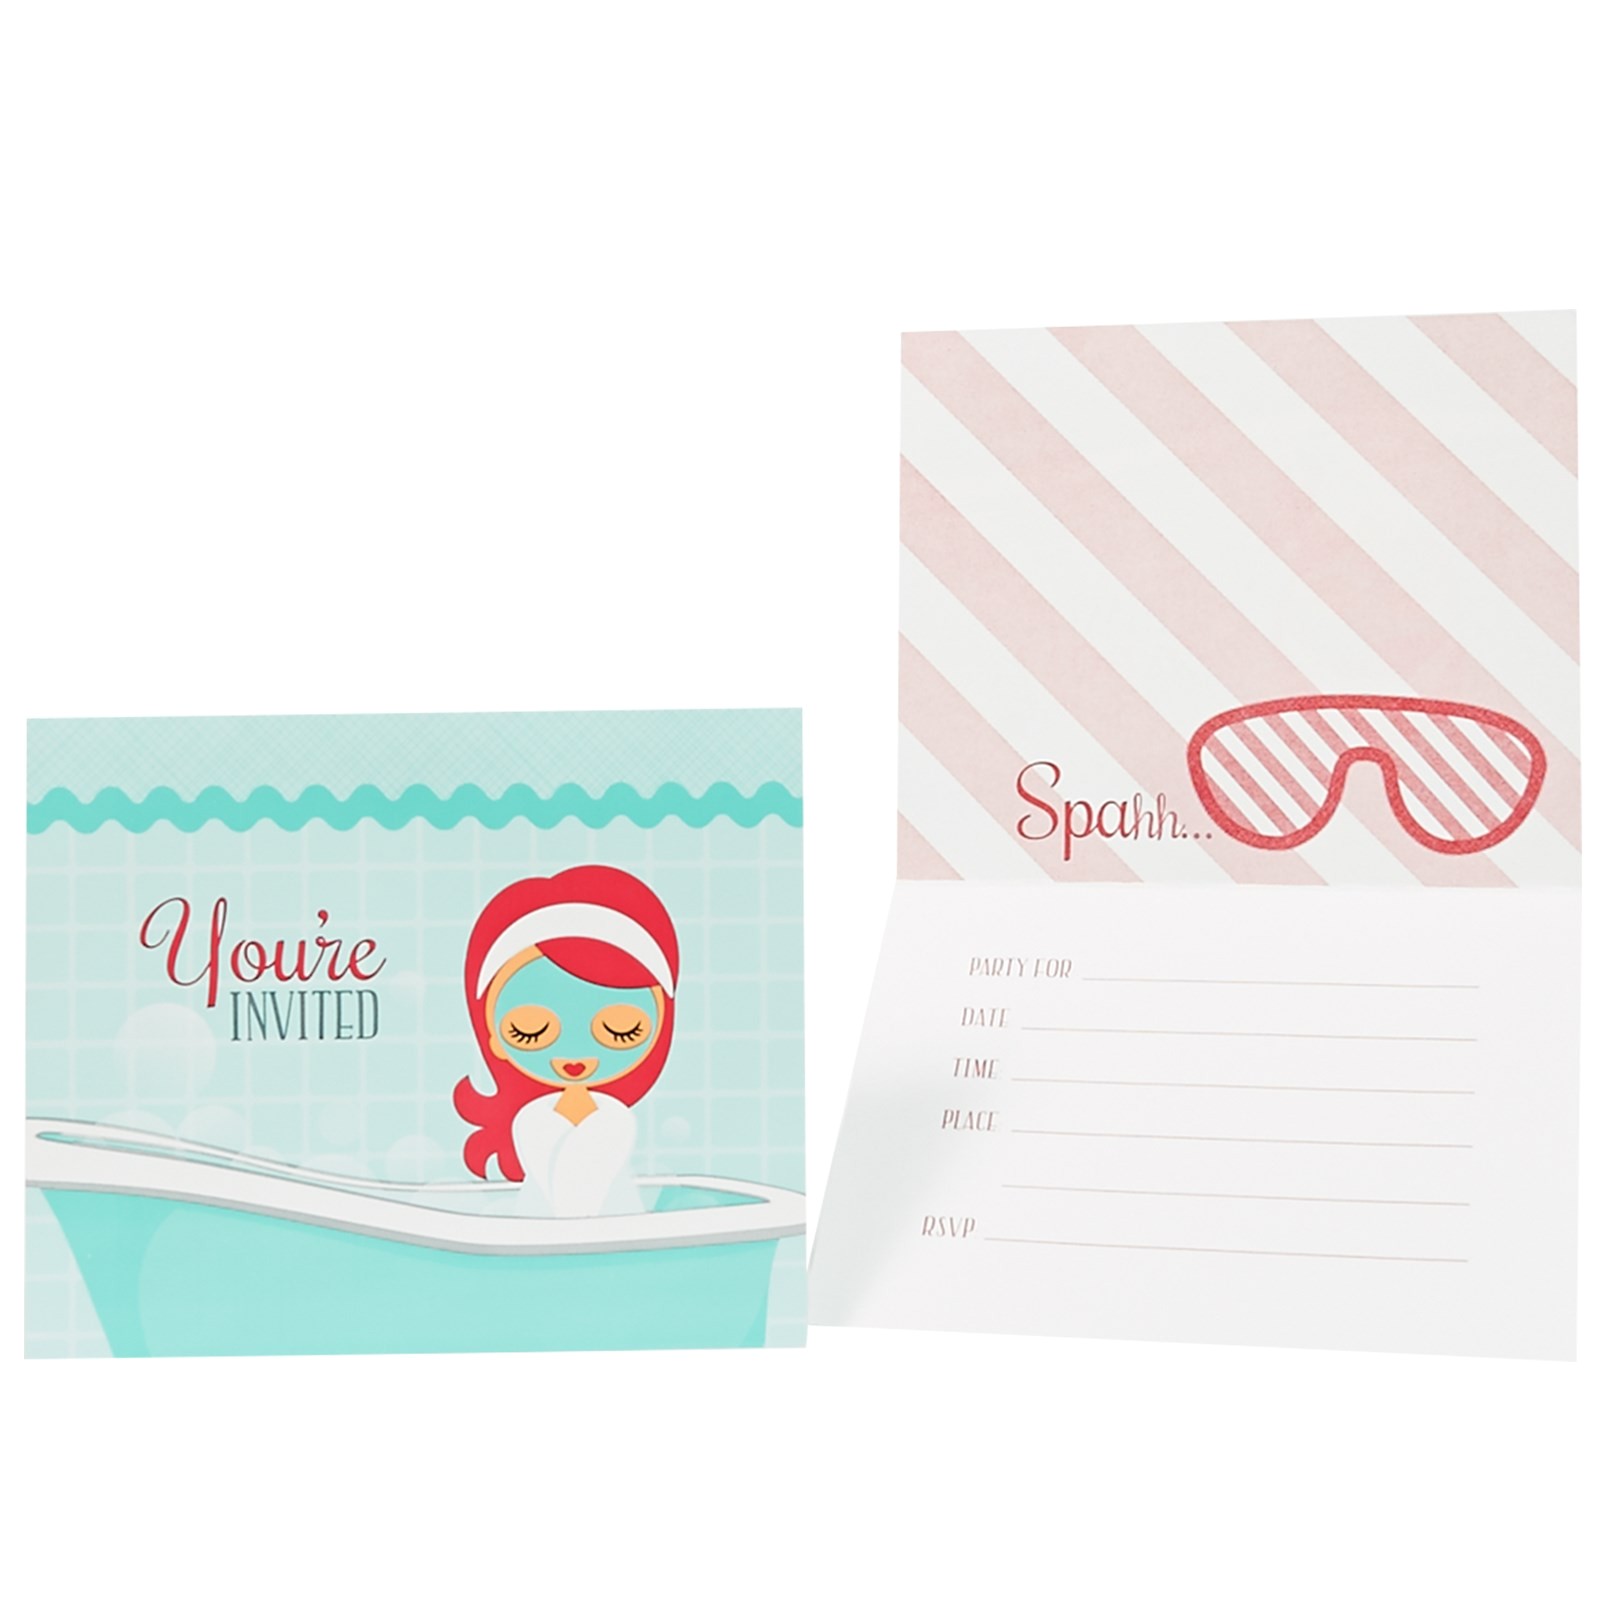 little spa party invitations